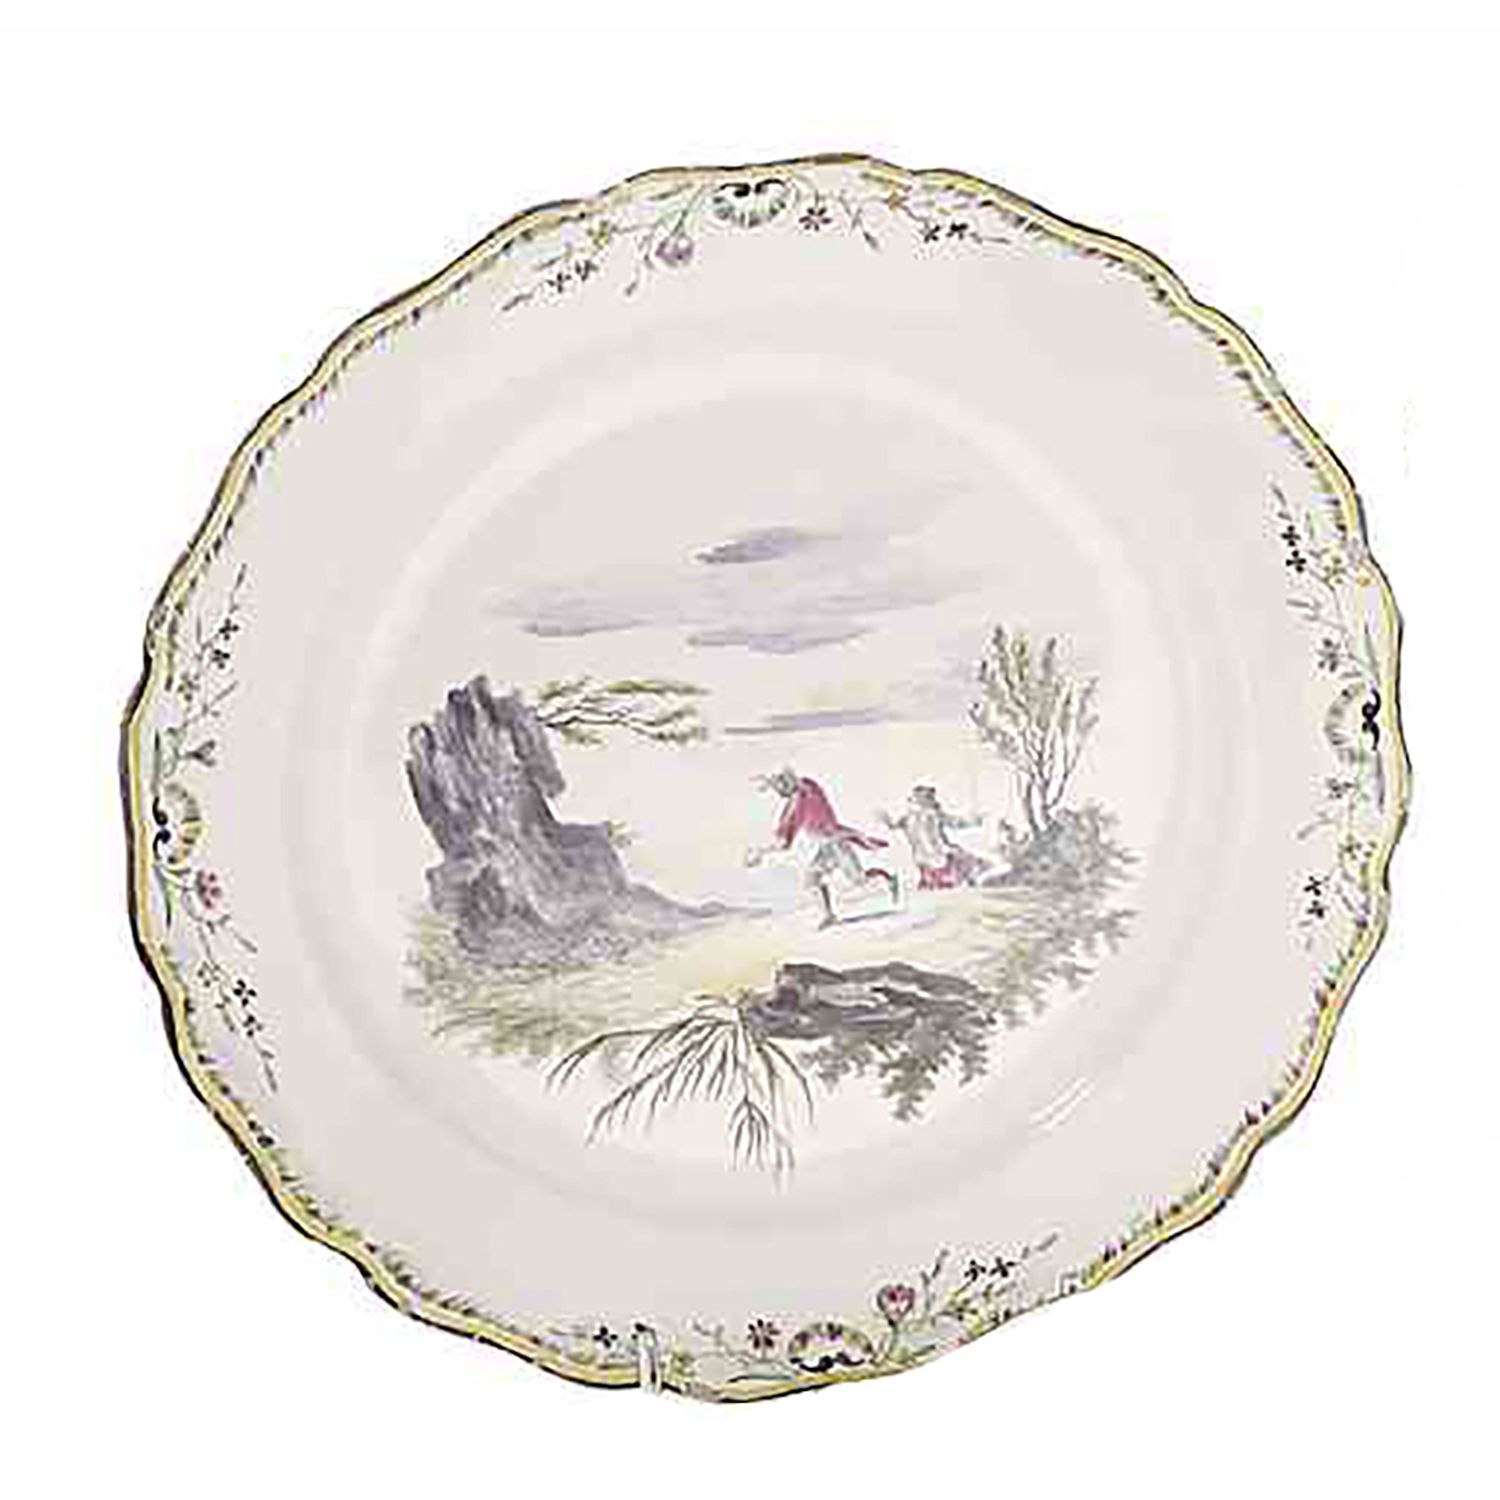 Null IN THE STYLE OF MARSEILLE

Plate decorated with two men, one holding a swor&hellip;